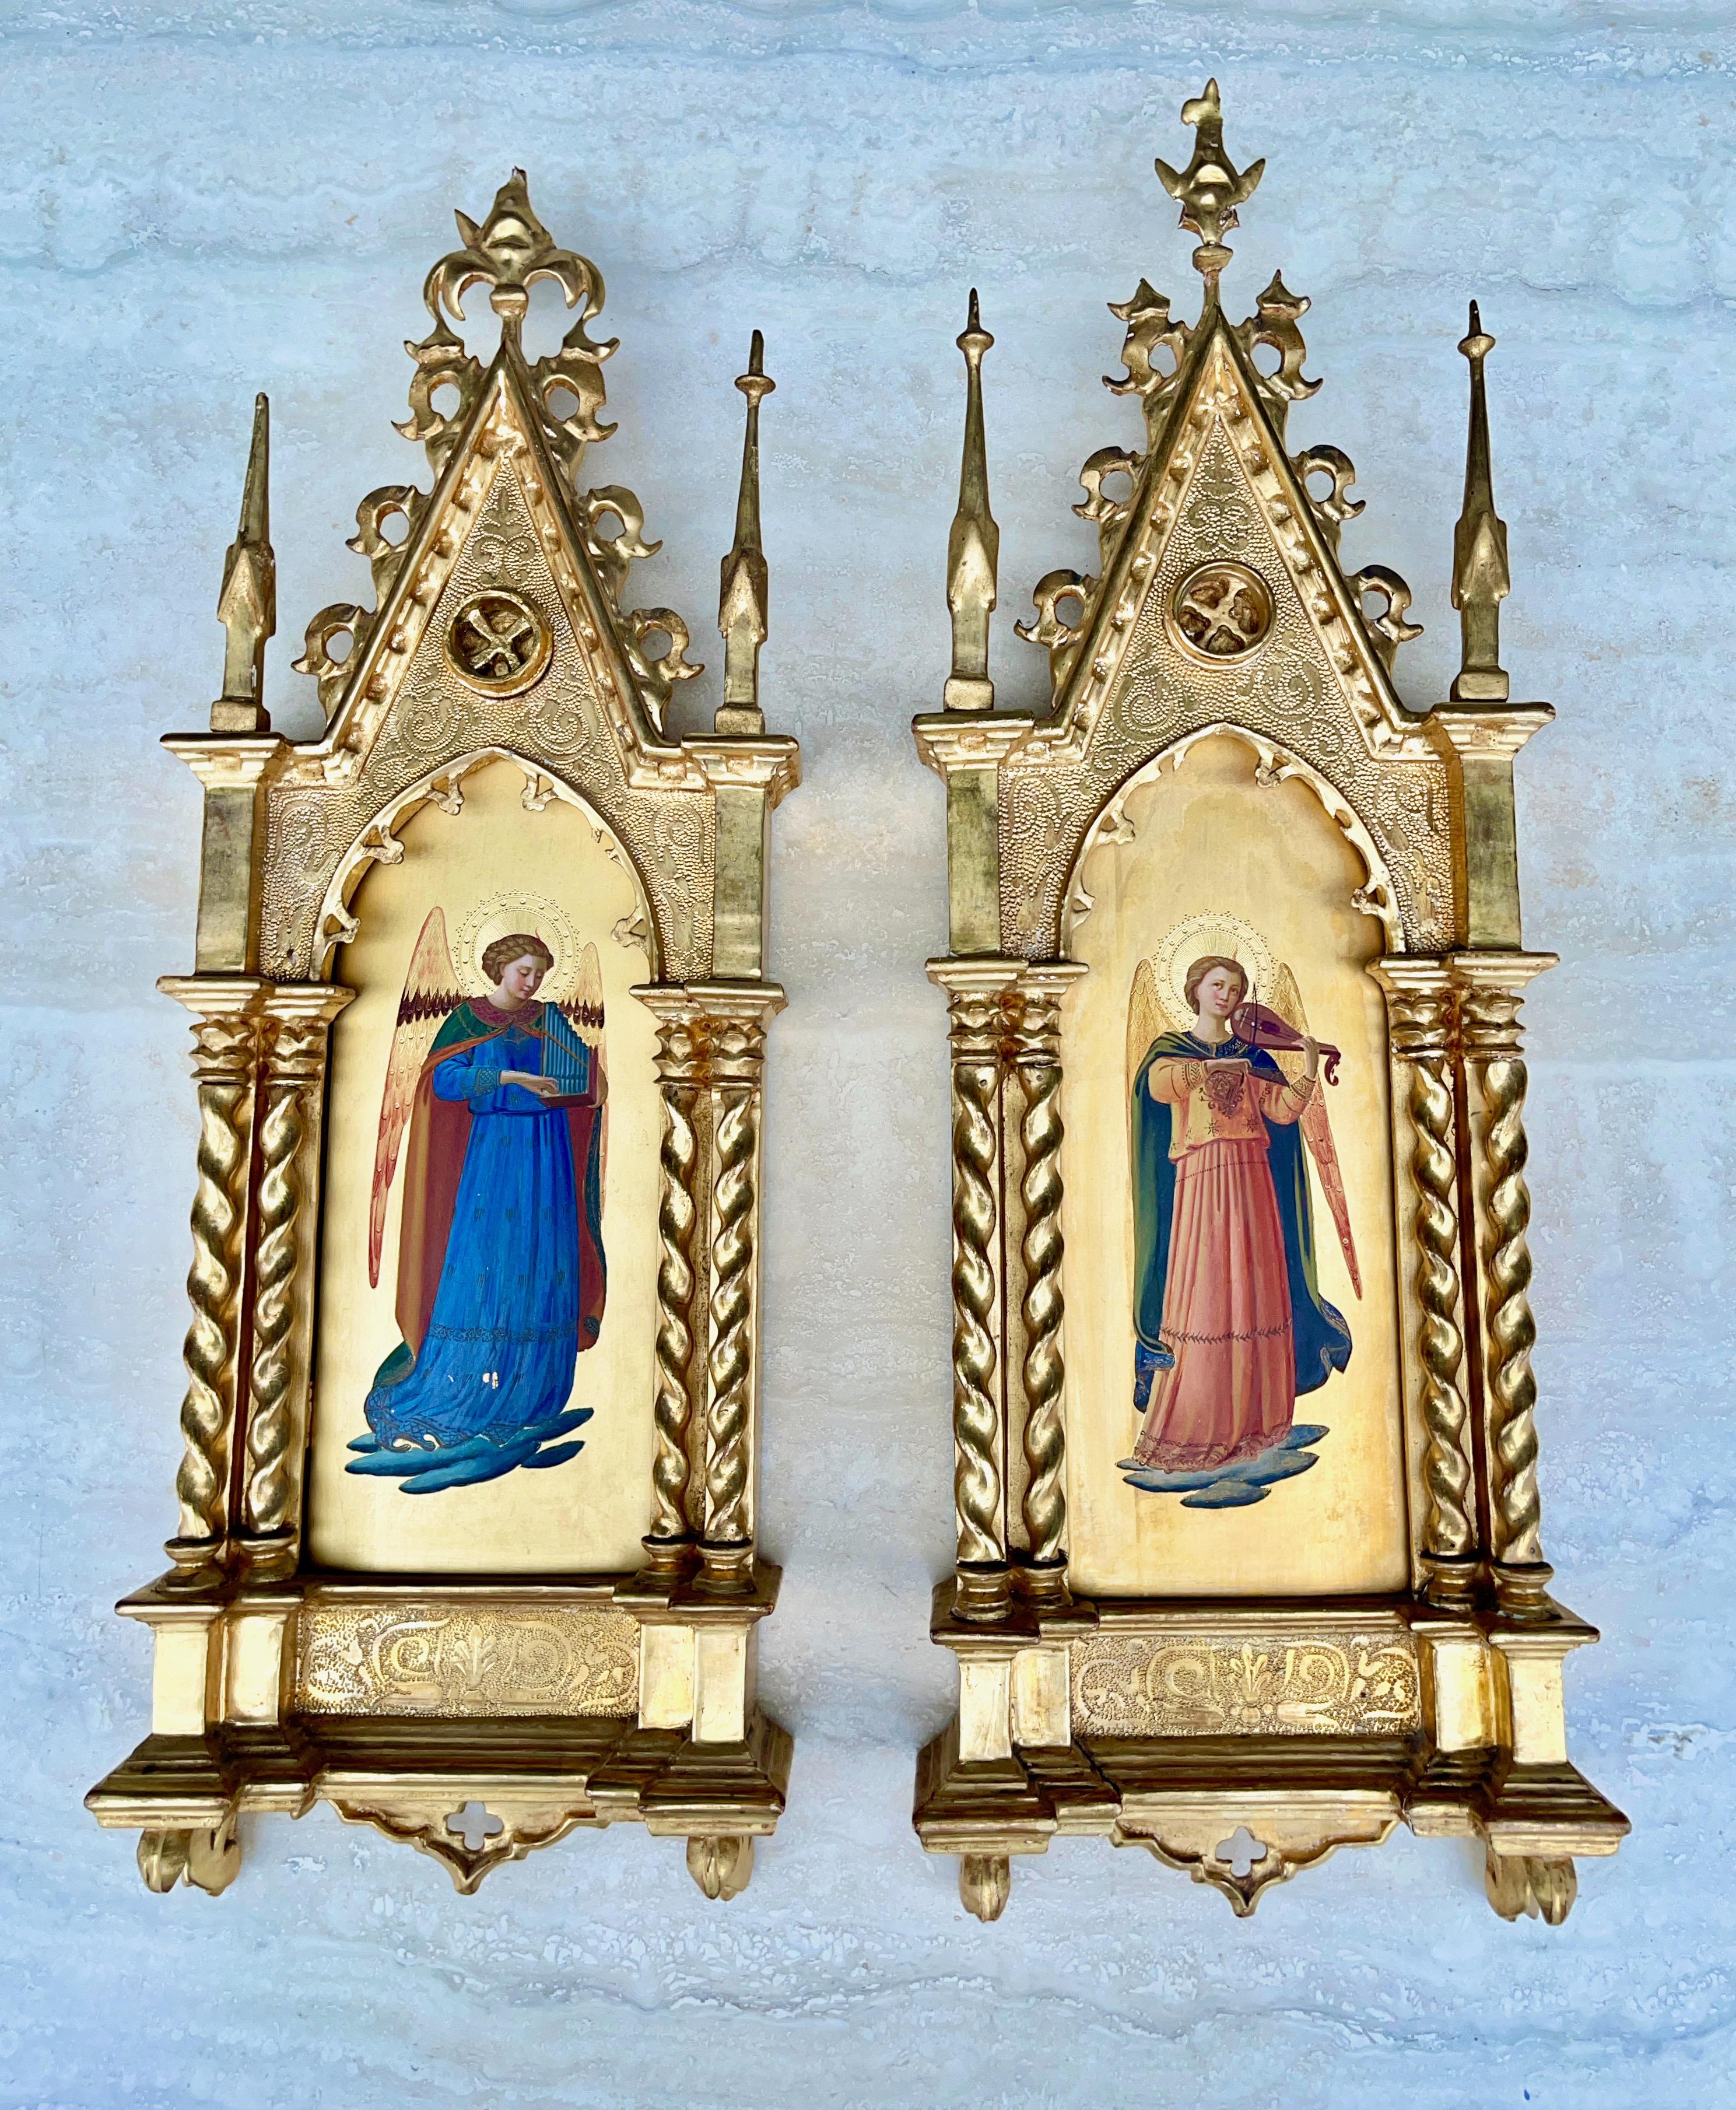 Two lovely 19th century paintings on board of Fra Angelico's angels from The Linaioli Tabernacle, 1433, where, when the tabernacle doors are open, can be seen in the arch surrounding the madonna and child, an ensemble of twelve angels playing